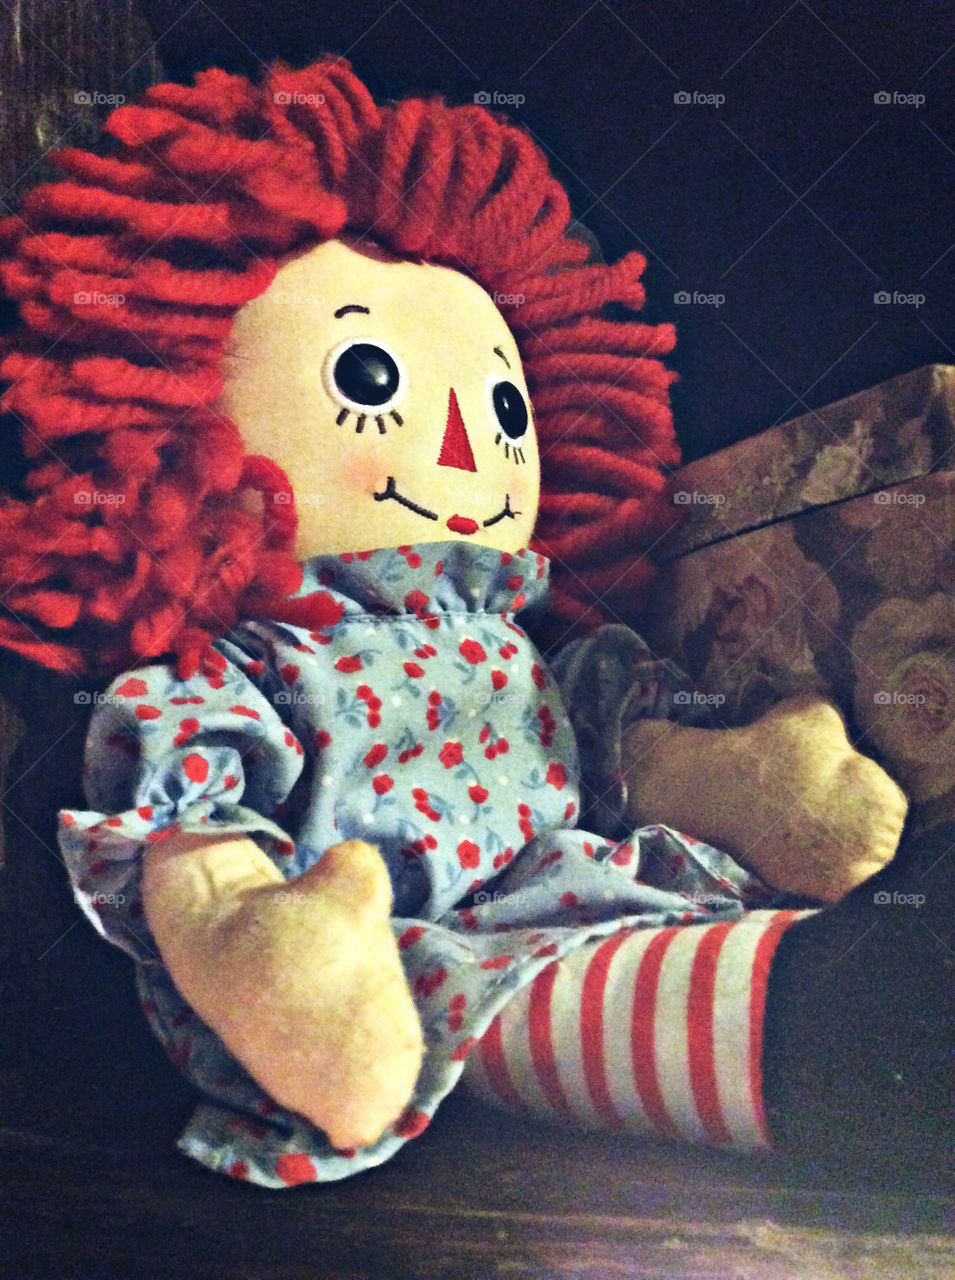 For all of my Halloween lovers out there, meet Annie. She is a raggedy ann doll, left behind by a sweet little girl who passed away and now possesses the doll. The little girl always called this Ann doll Annie, because of little orphan Annie. She is a neutral spirit, and as far as we know means no harm. 